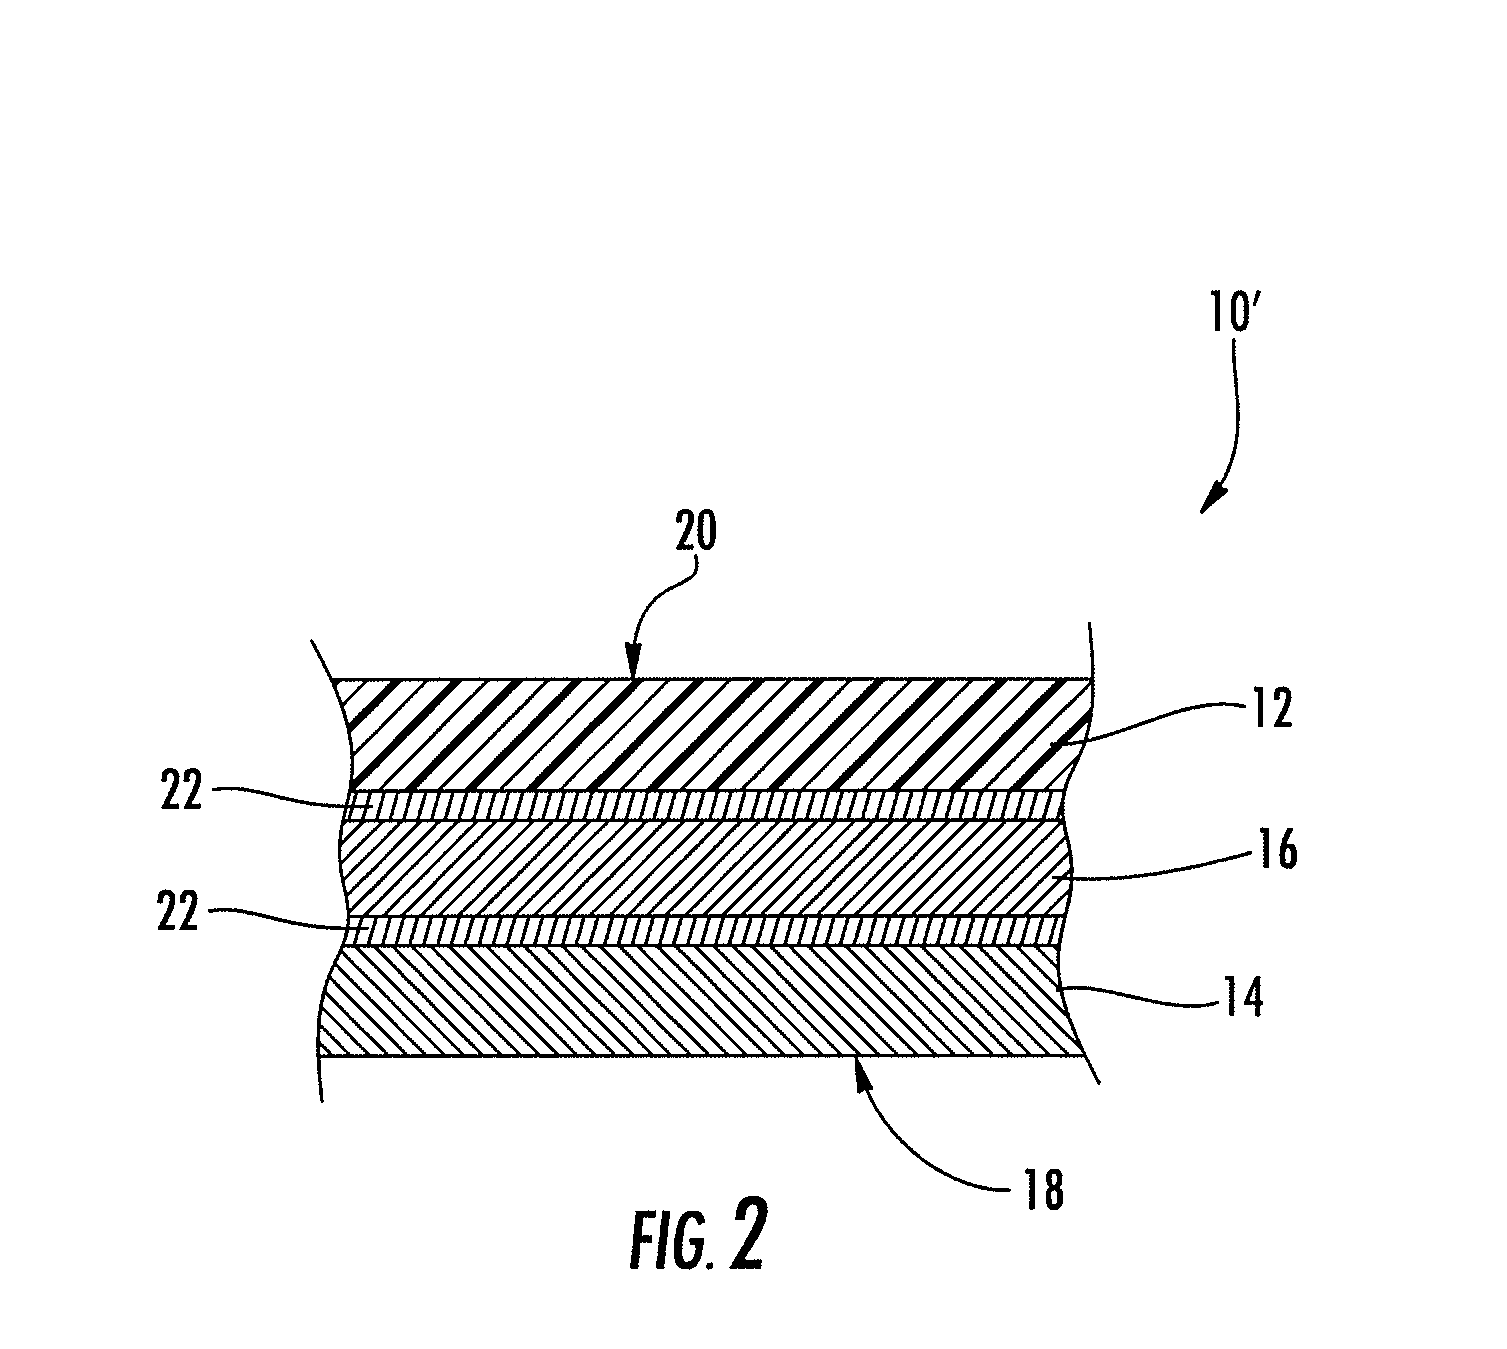 Multilayer Film Having an Active Oxygen Barrier Layer With Radiation Enhanced Active Barrier Properties